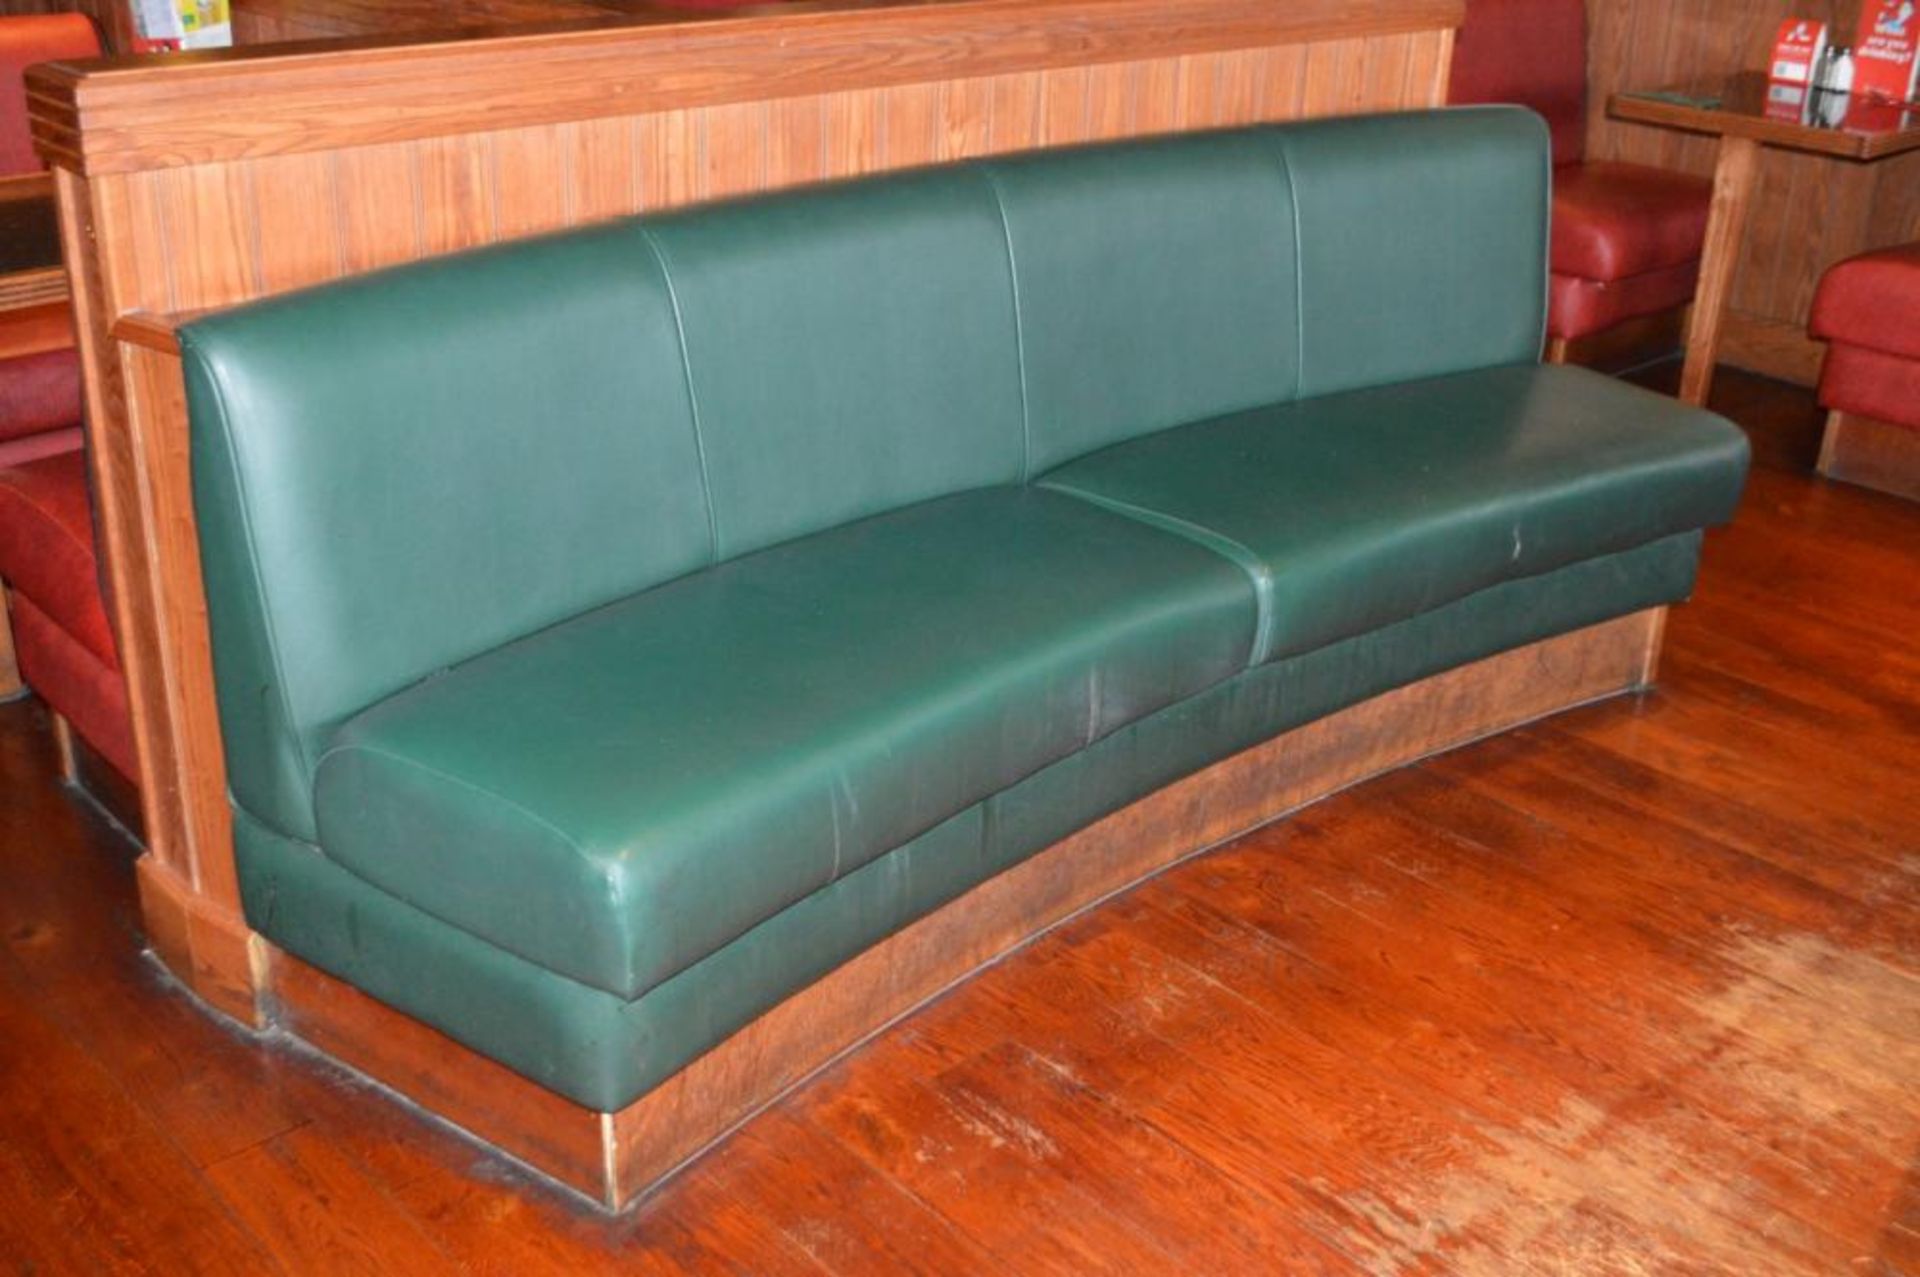 1 x Selection of Cosy Bespoke Seating Booths in a 1950's Retro American Diner Design With Dining Tab - Image 24 of 30